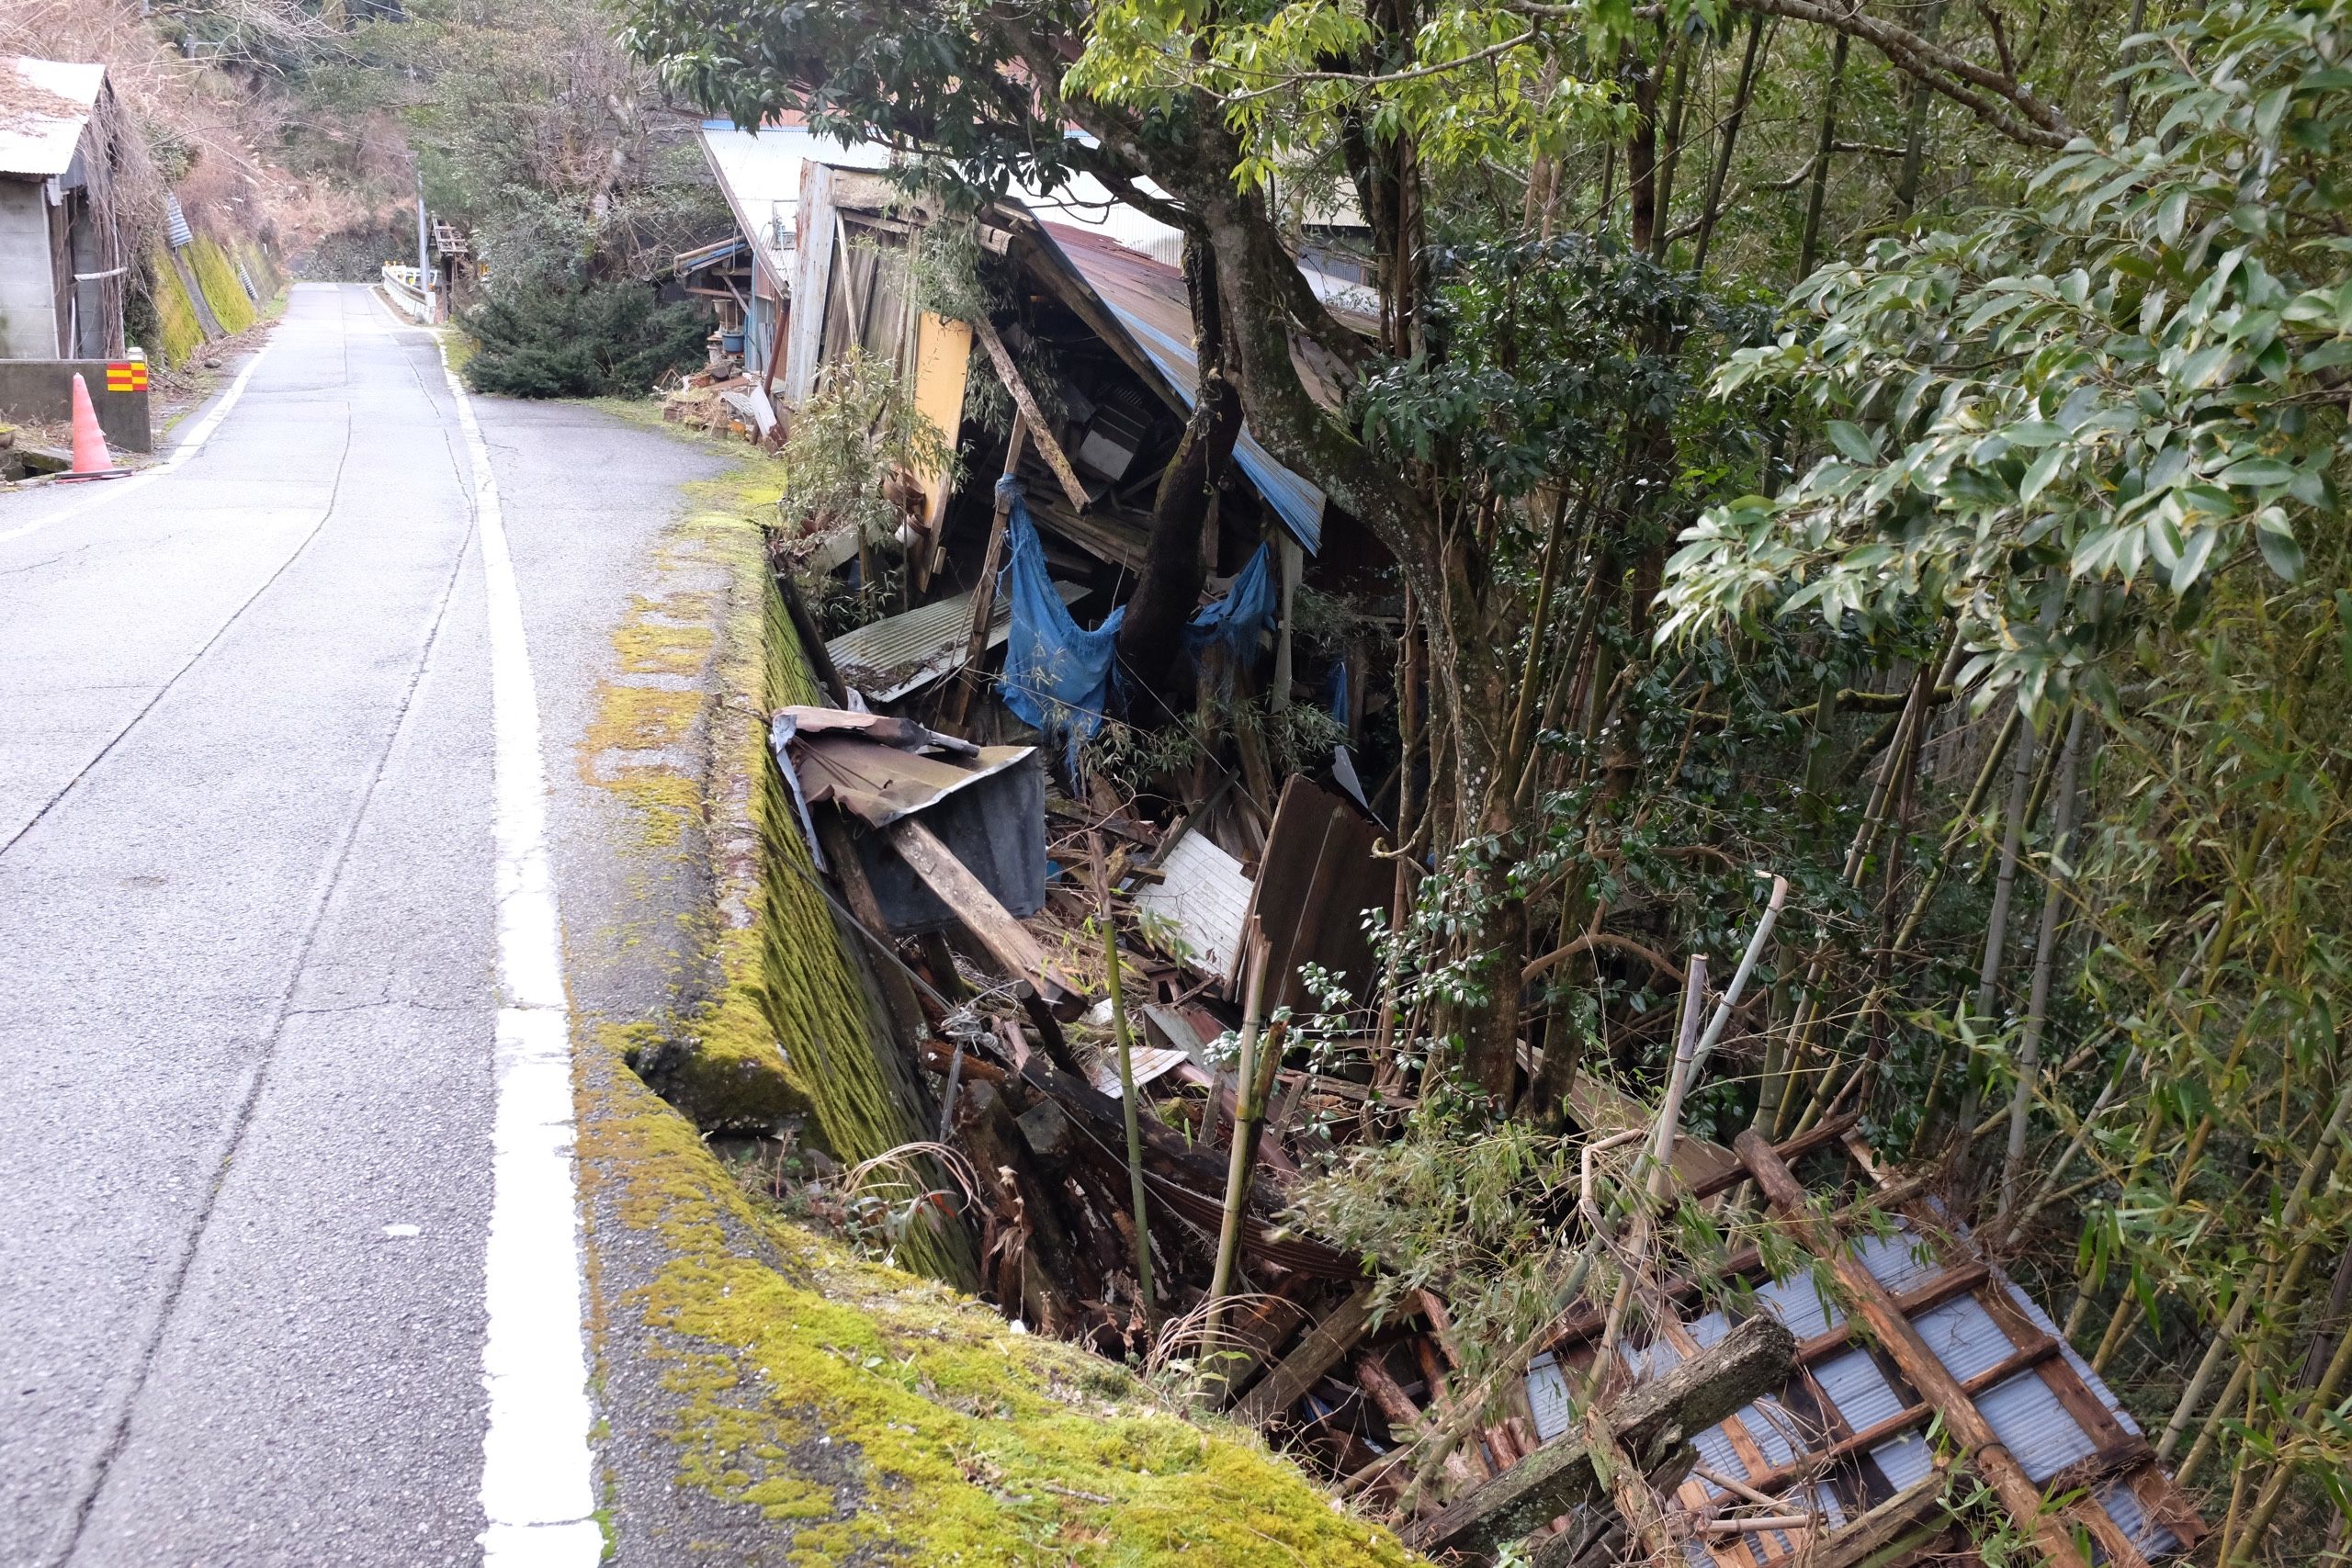 Houses collapsed into the forest by the side of a very narrow village road.